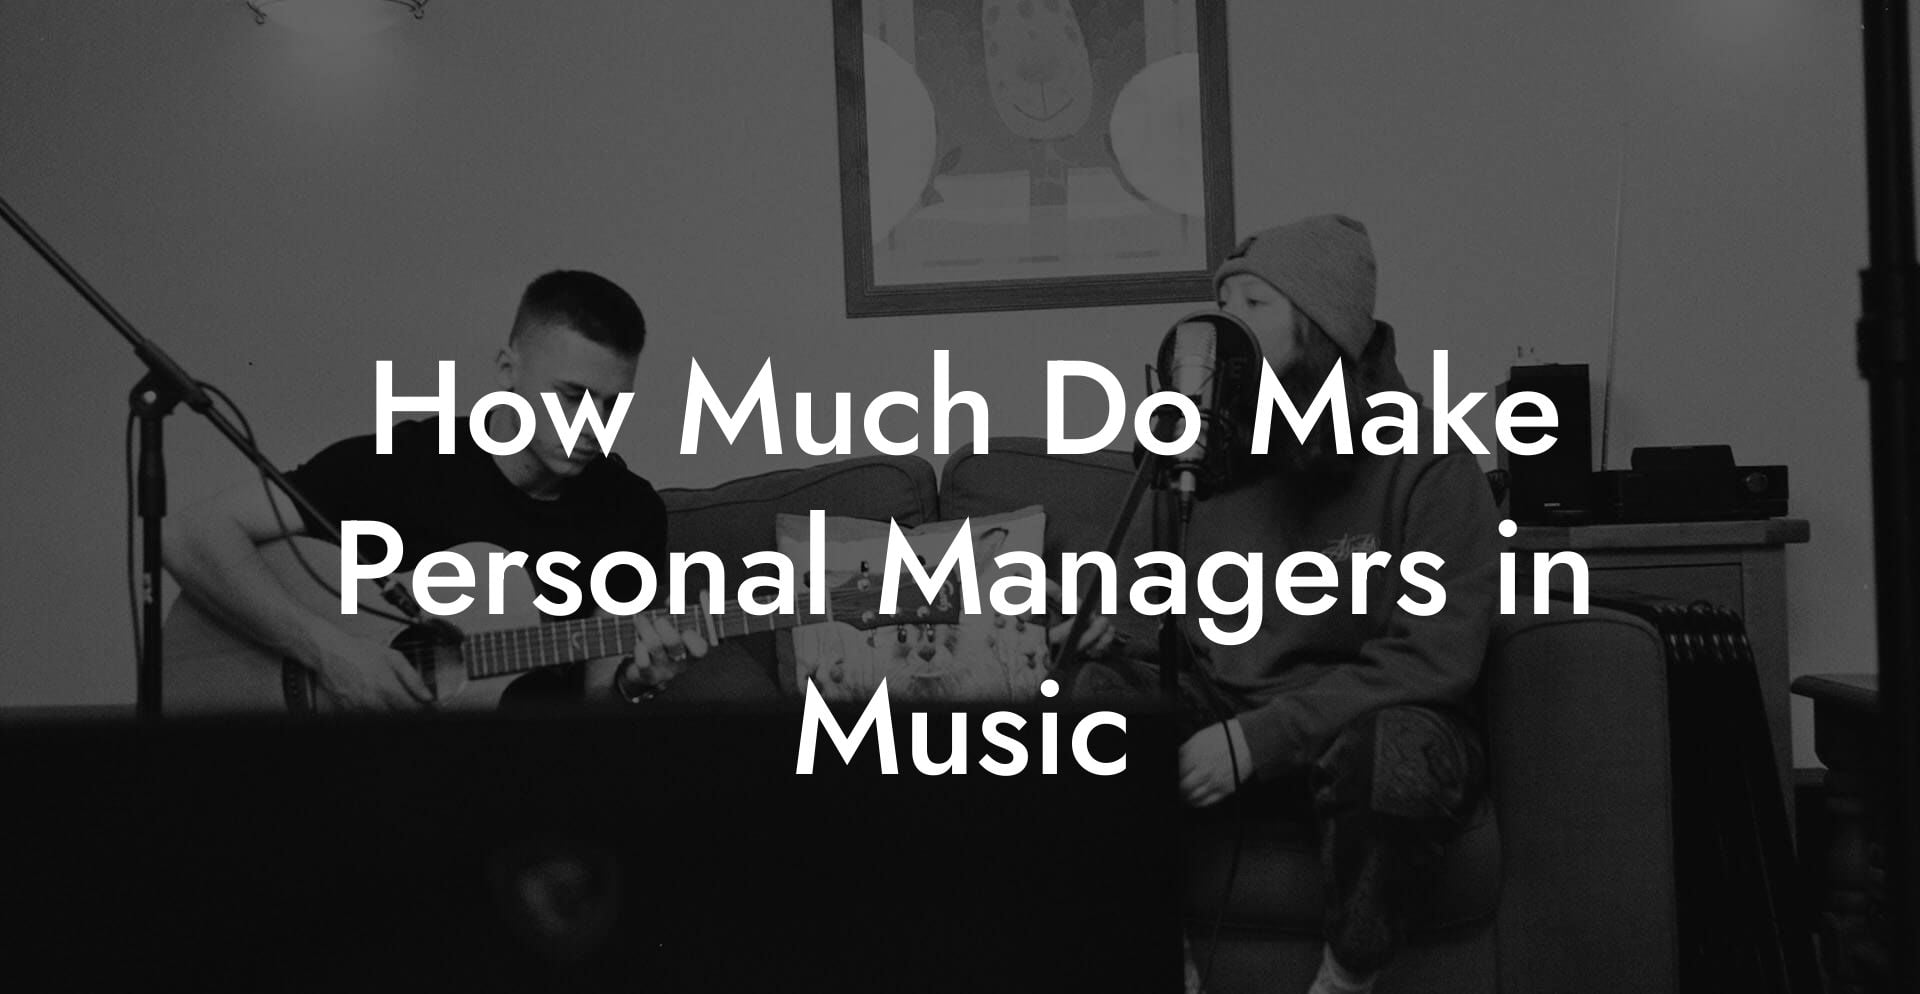 How Much Do Make Personal Managers in Music